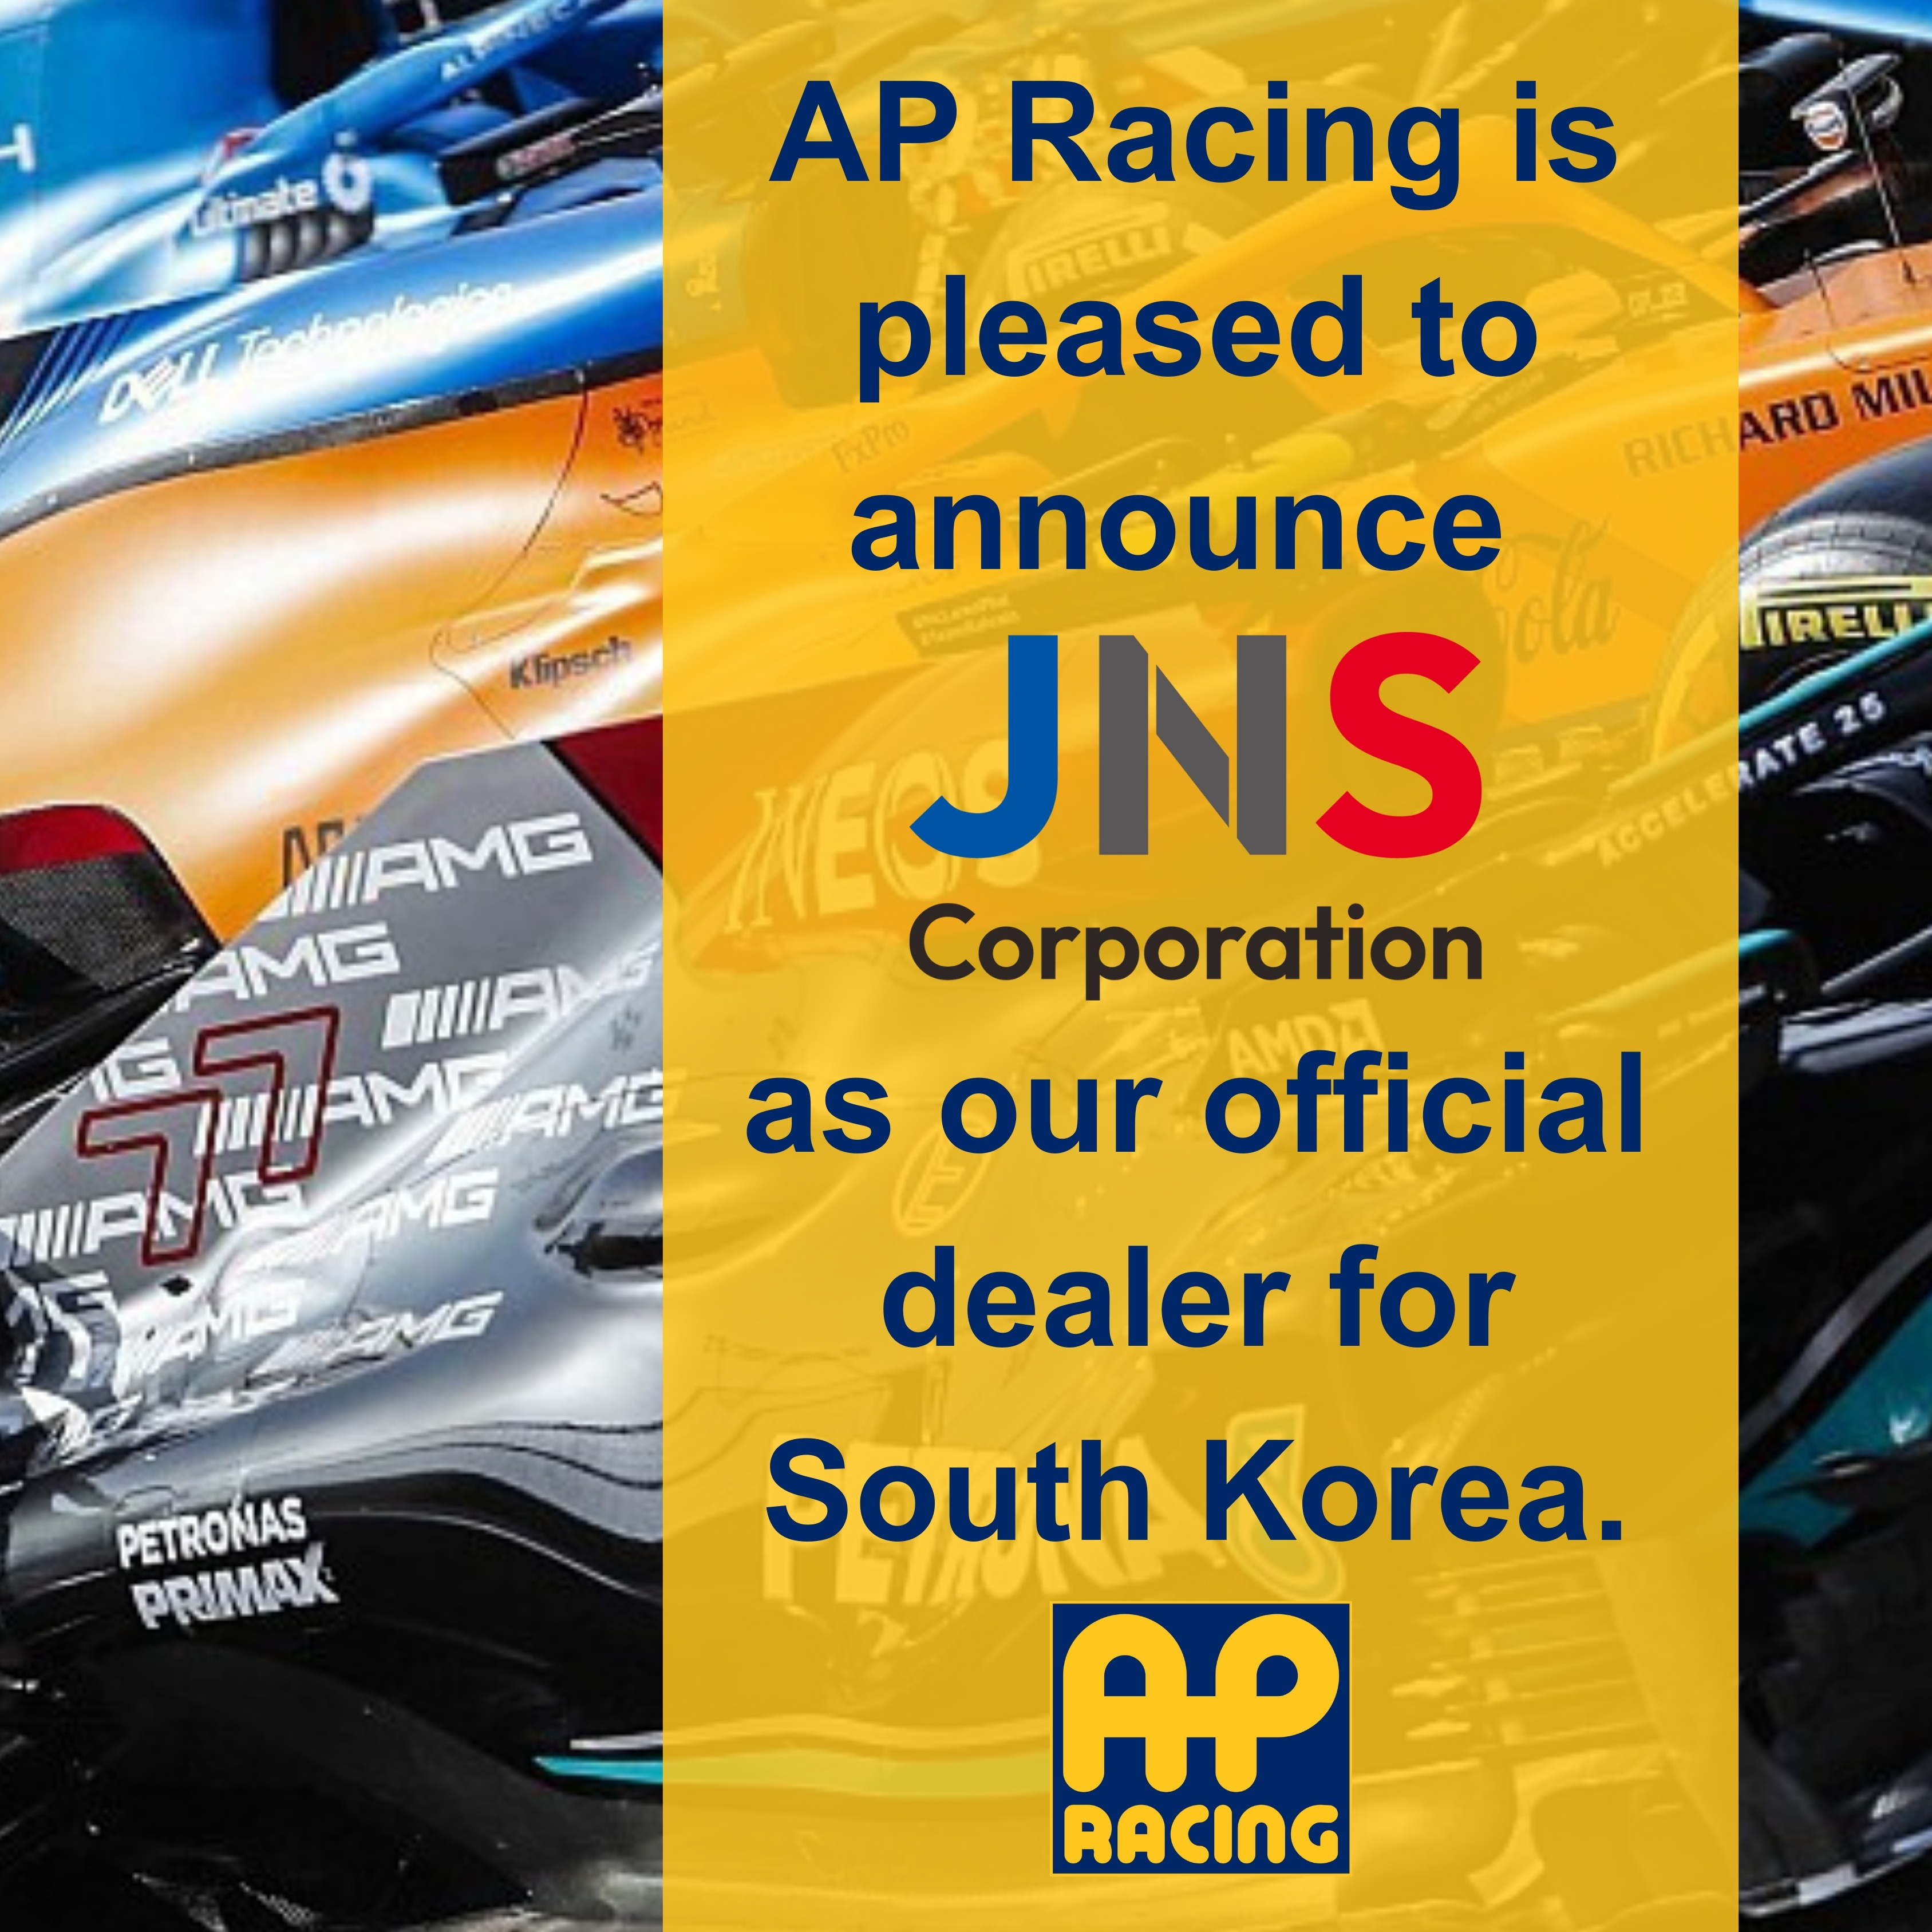 AP Racing Appoints New South Korea Dealer - Featured Image